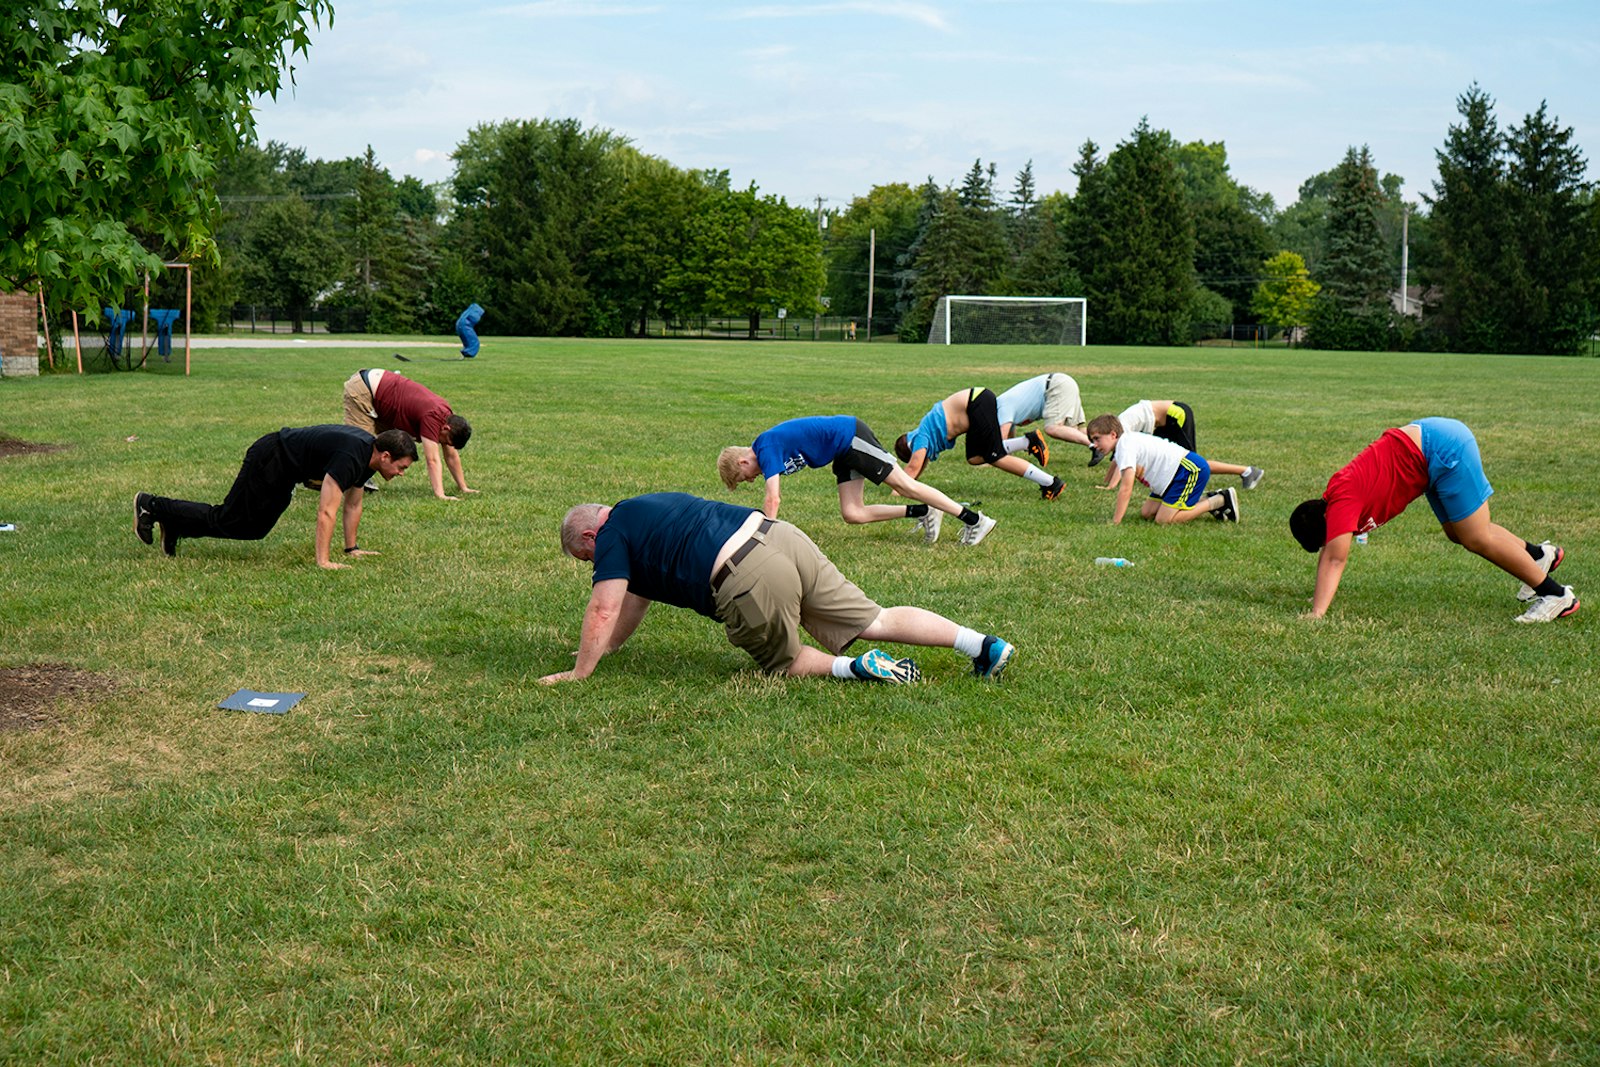 Boys and leaders of the "Exercitus Mariae" youth group do push-ups while praying the rosary Aug. 20. By combining workouts with prayer, leaders say they hope to instill a sense of personal and faith discipline in their young charges.